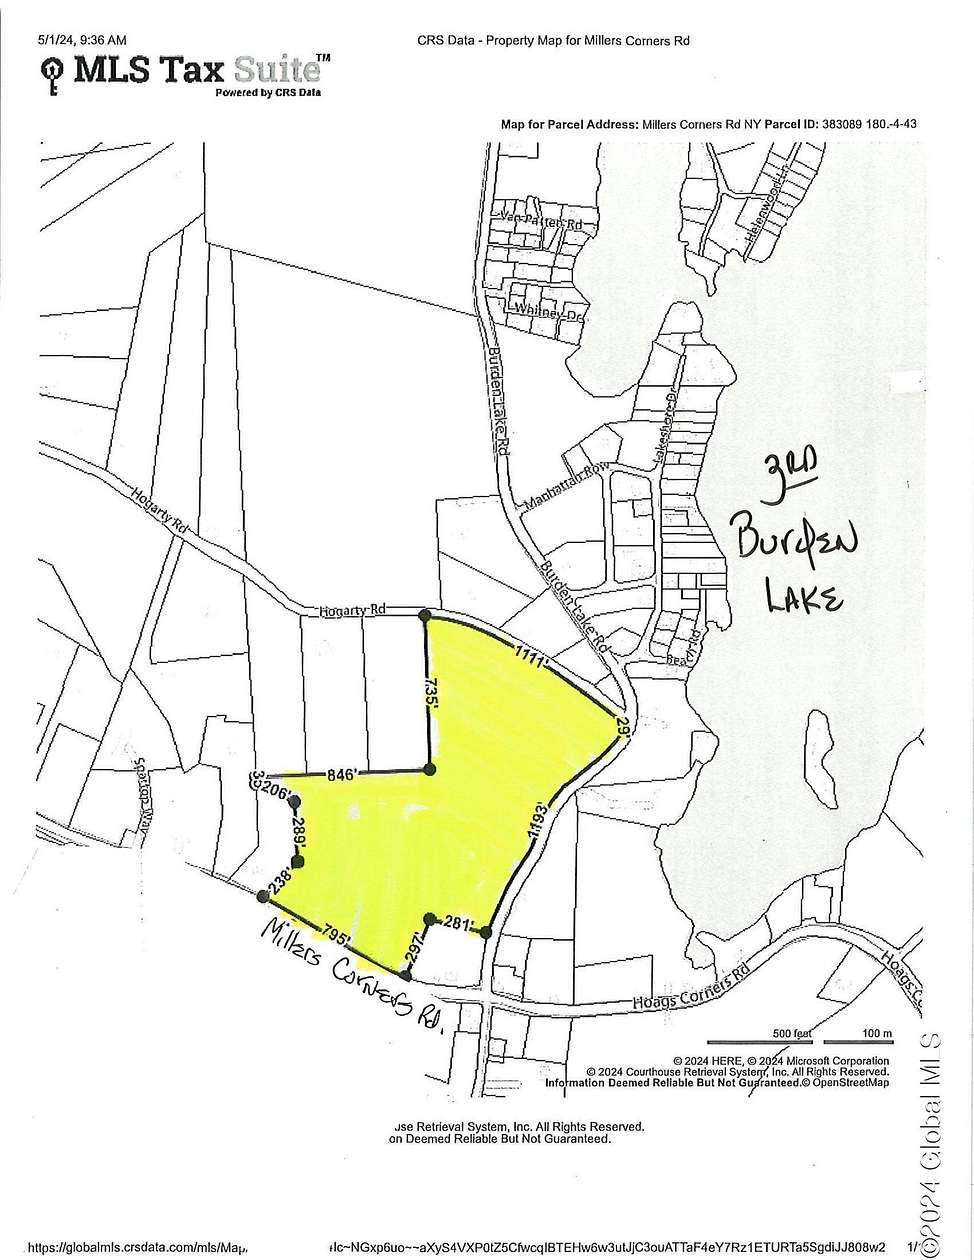 38.1 Acres of Land for Sale in Nassau, New York